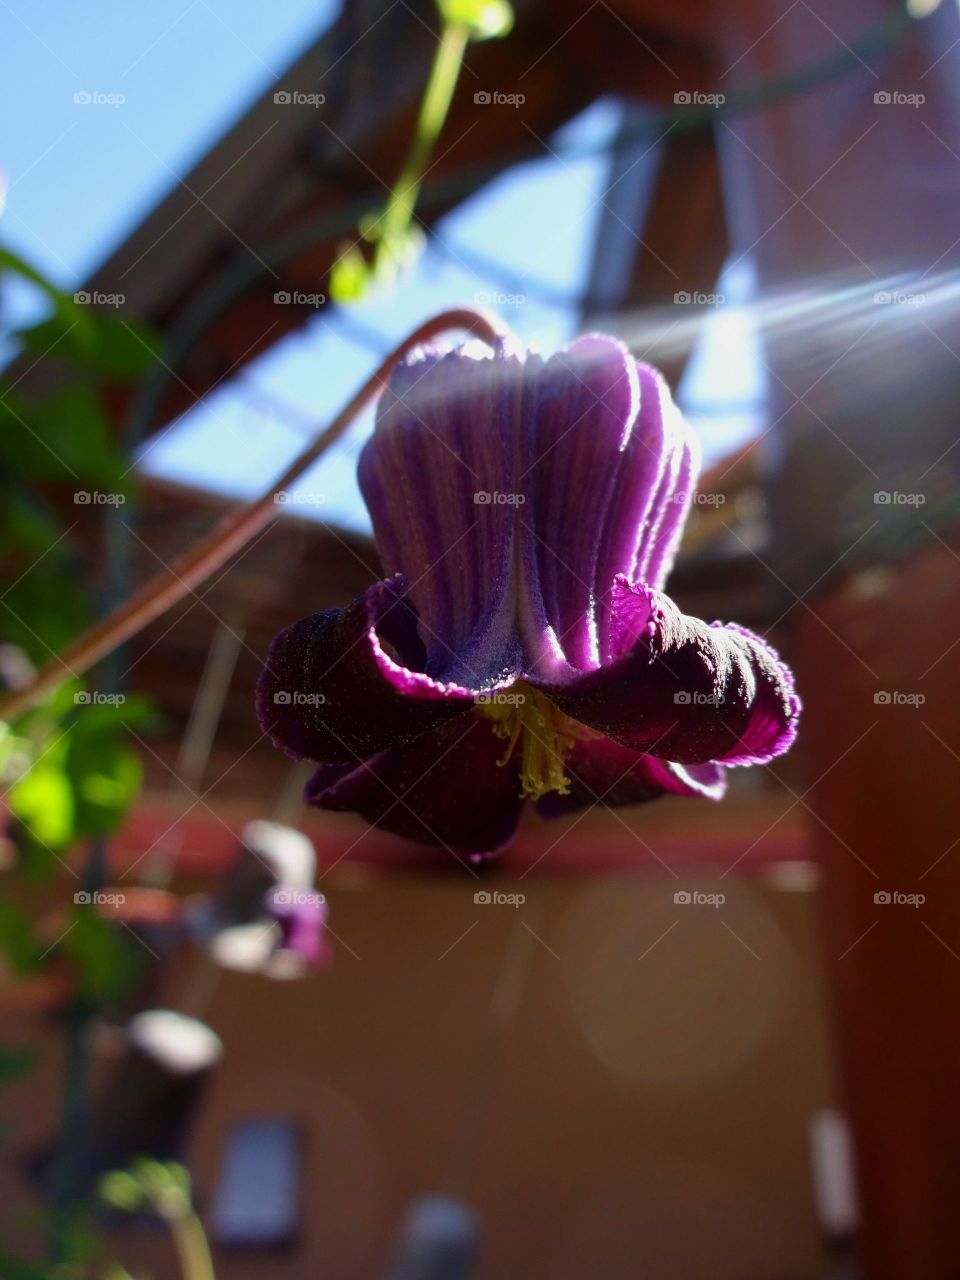 Leather Flower Clematis